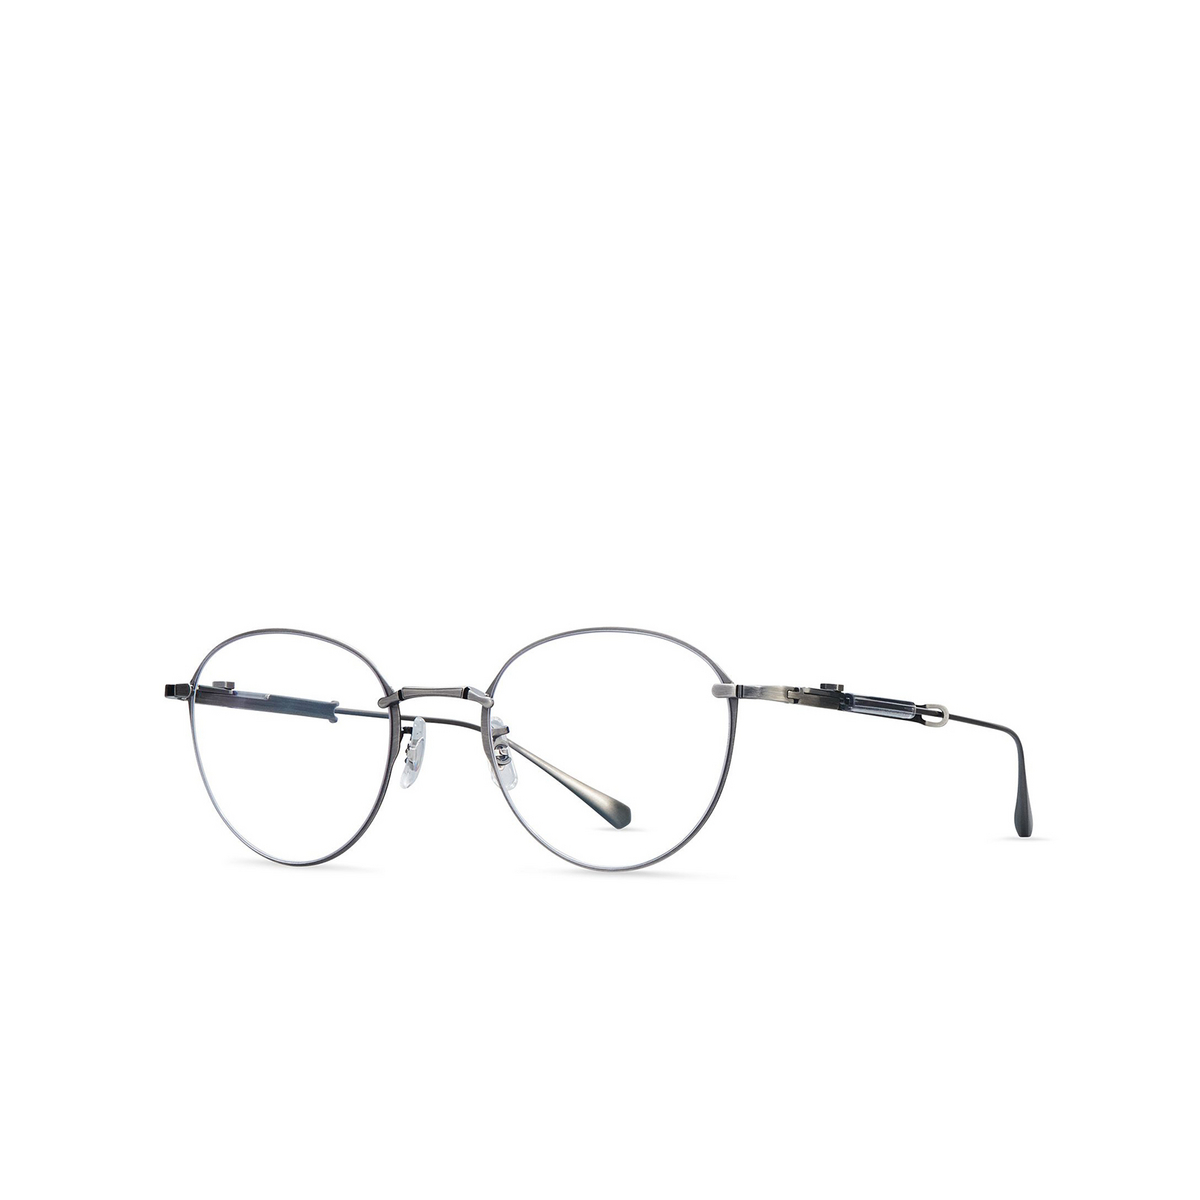 Mr. Leight MULHOLLAND CL Eyeglasses PW-GRYSTN Pewter-Greystone - three-quarters view